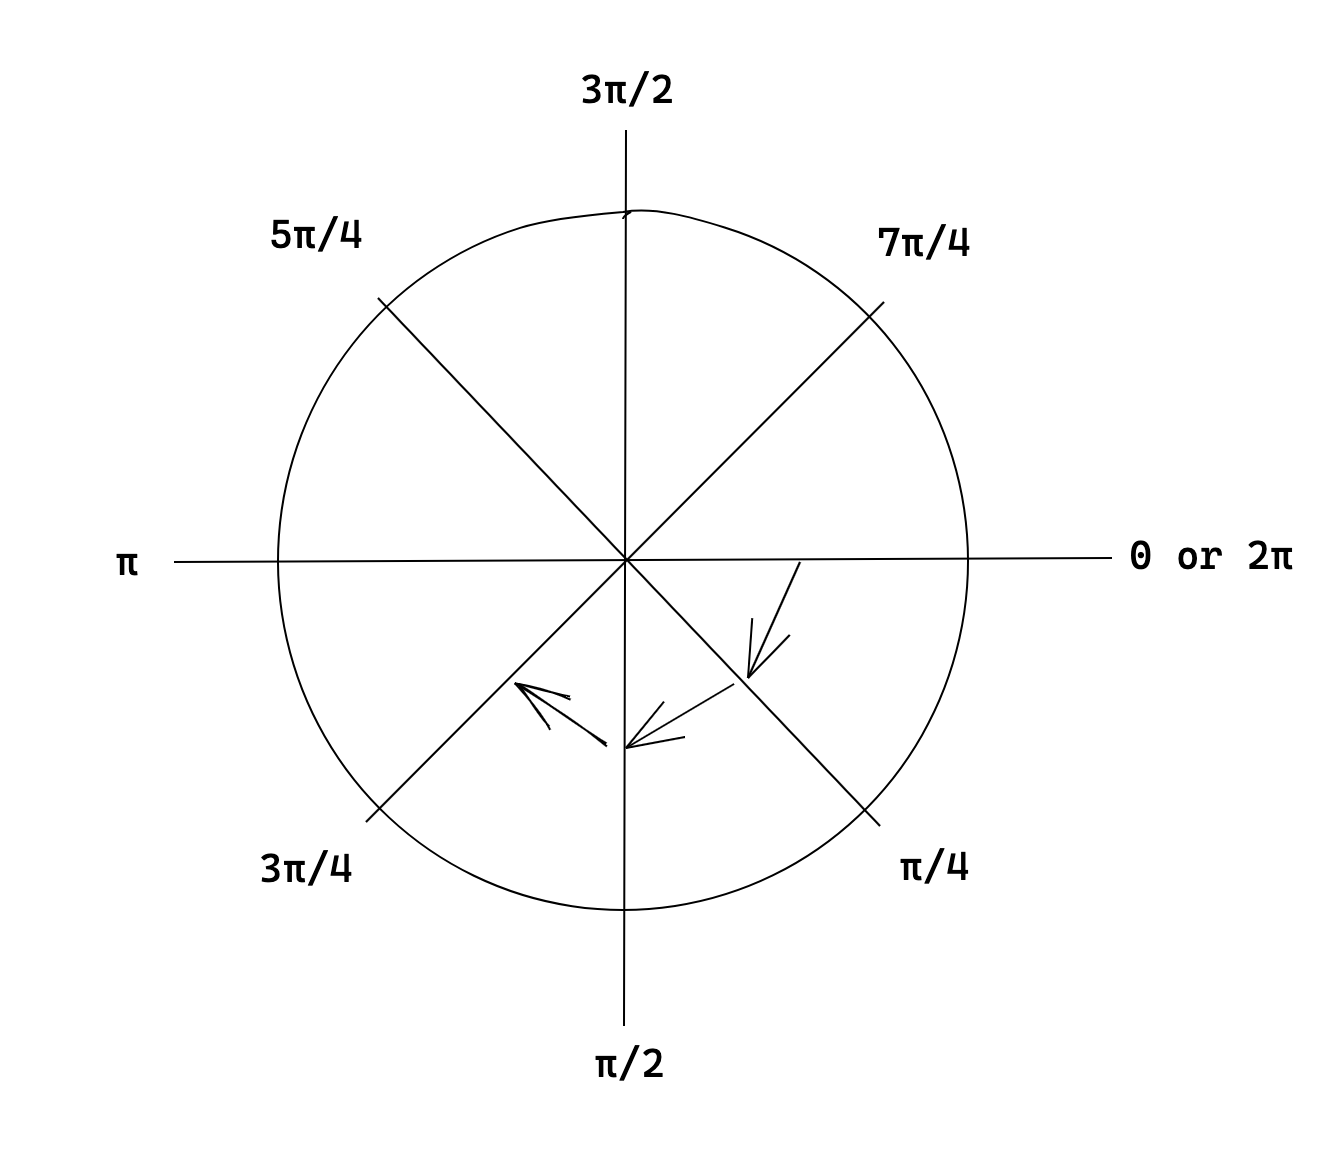 Diagram showing that radians increase as you move around the circle clockwise, starting from the x-axis